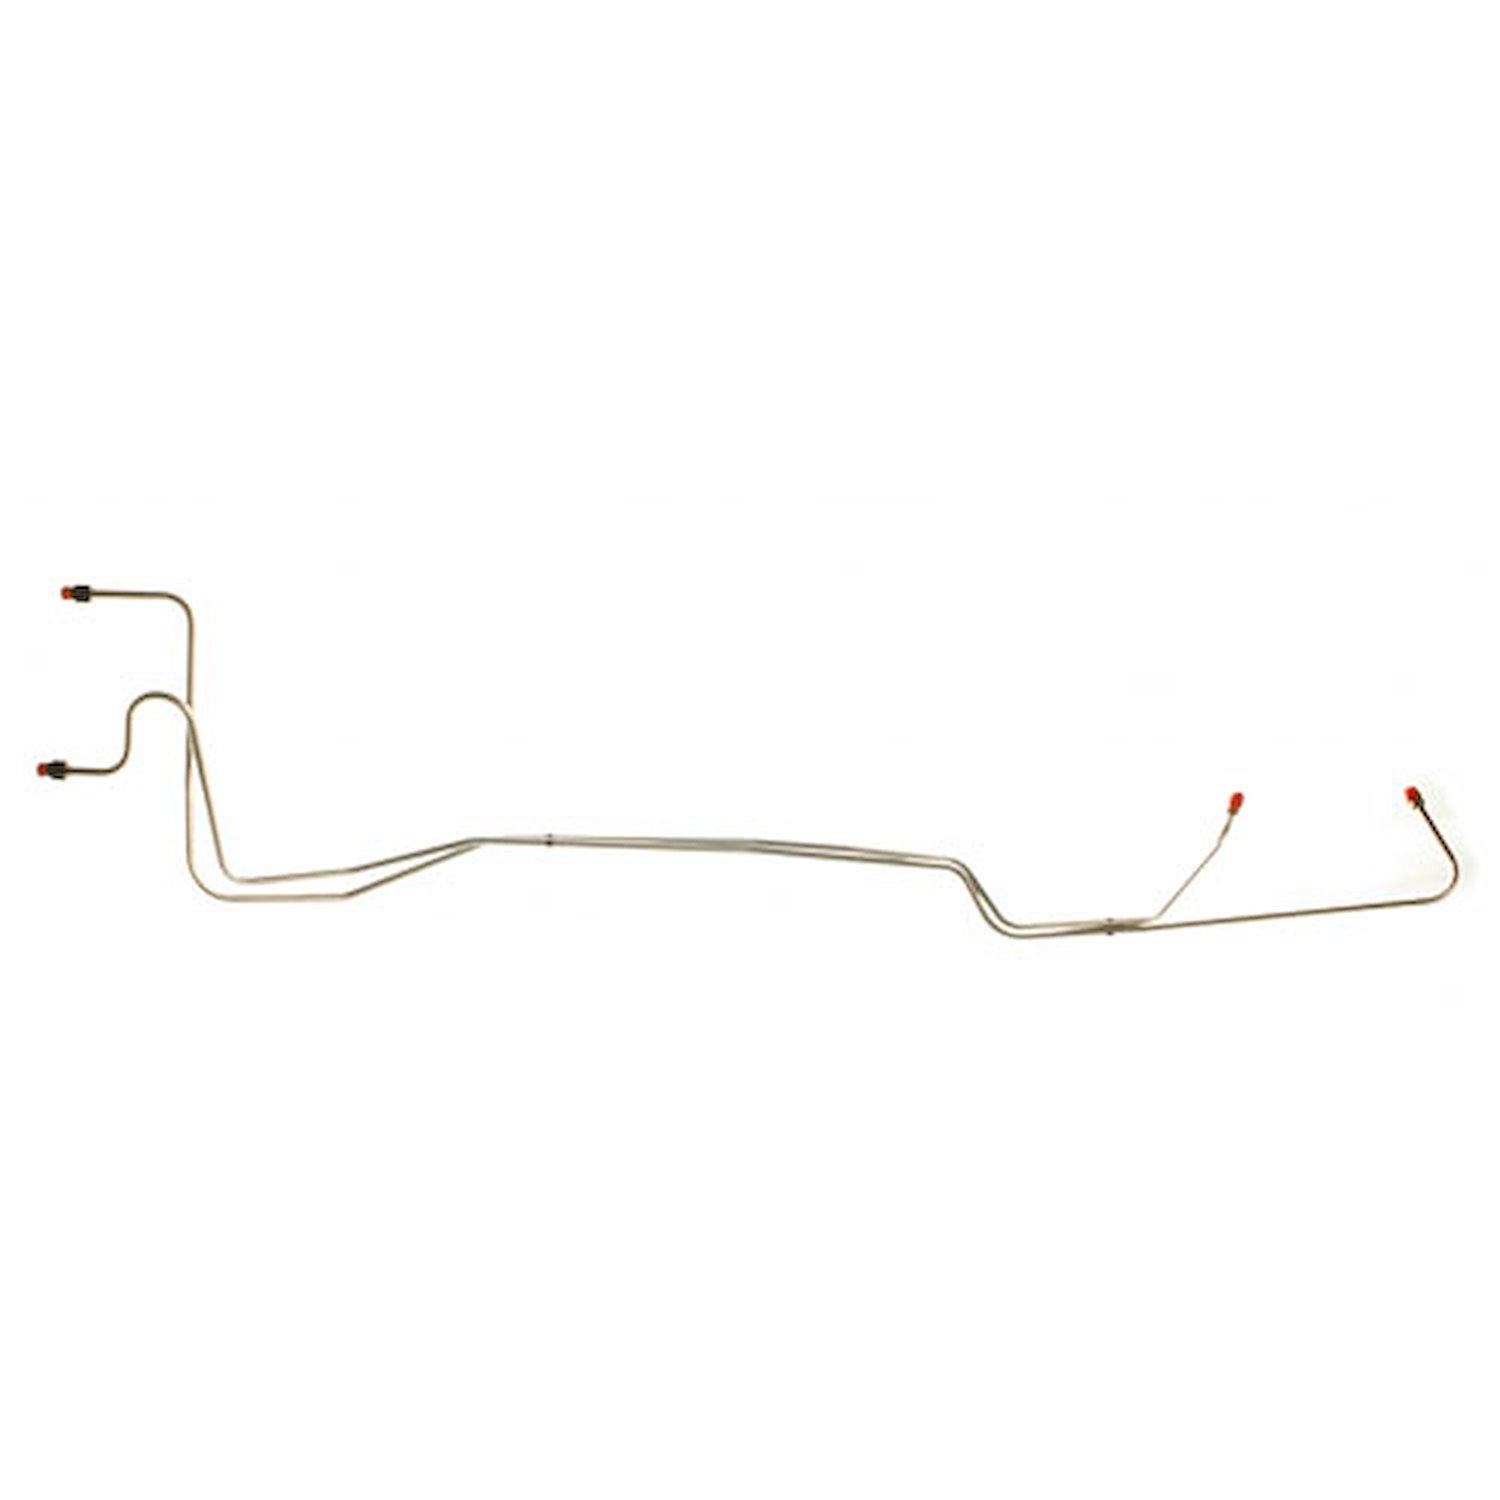 Stainless Steel Transmission Cooler Lines 1967-70 Ford Mustang, Mercury Cougar, Lincoln